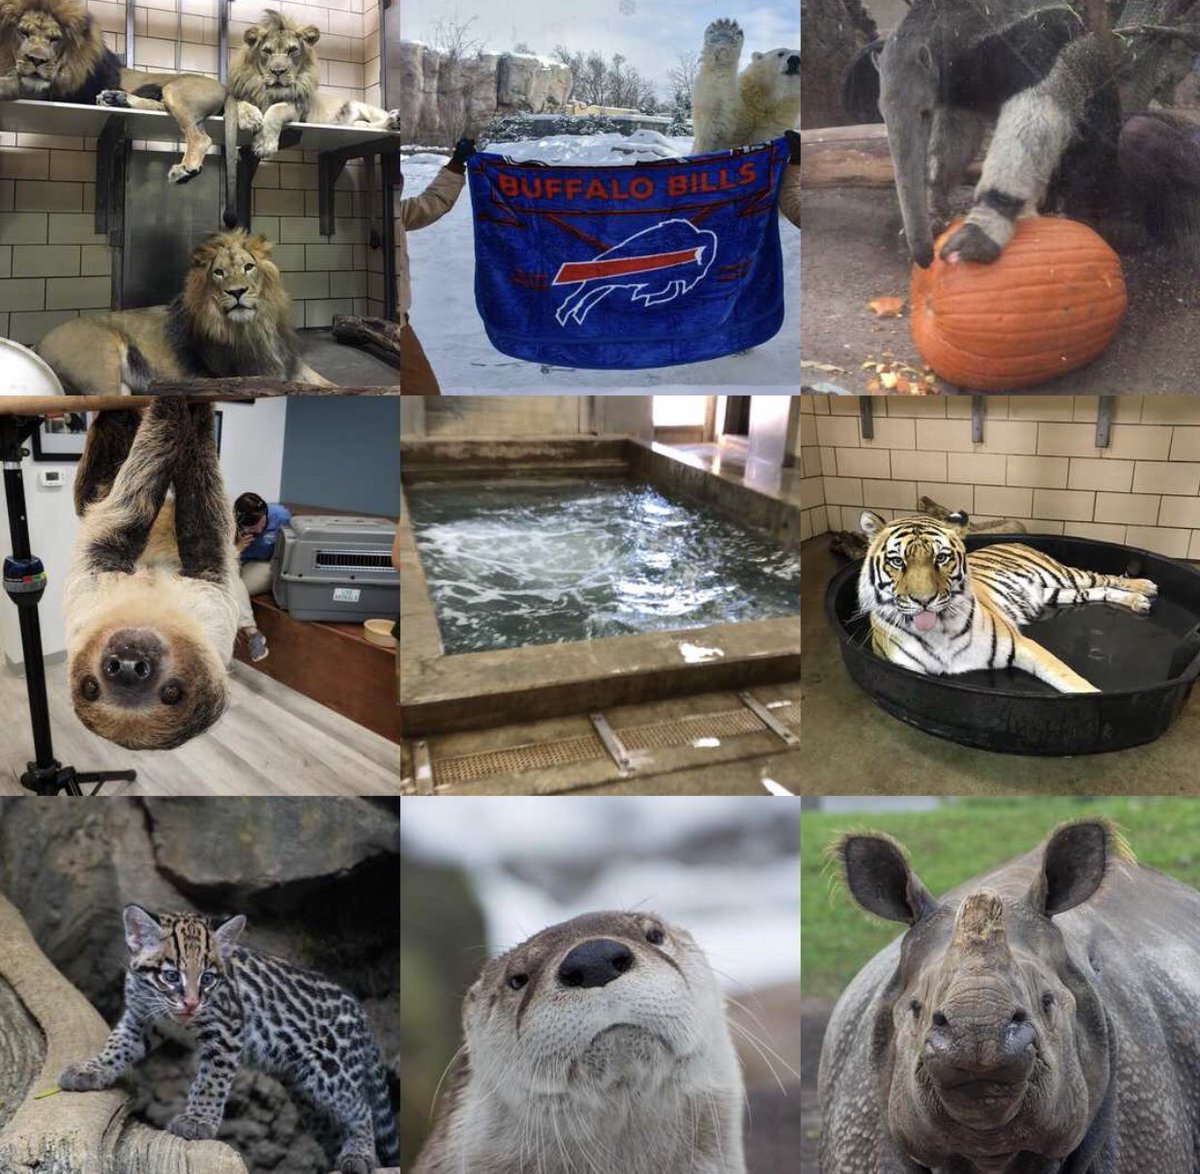 What a year 2018 has been! Thanks for all your support and likes! Here’s to 2019! #topnine2018 #topnine #buffalo #2018 #buffalozoo #visitthezoo #wildestplaceintown #newyear #newyearseve #happynewyear